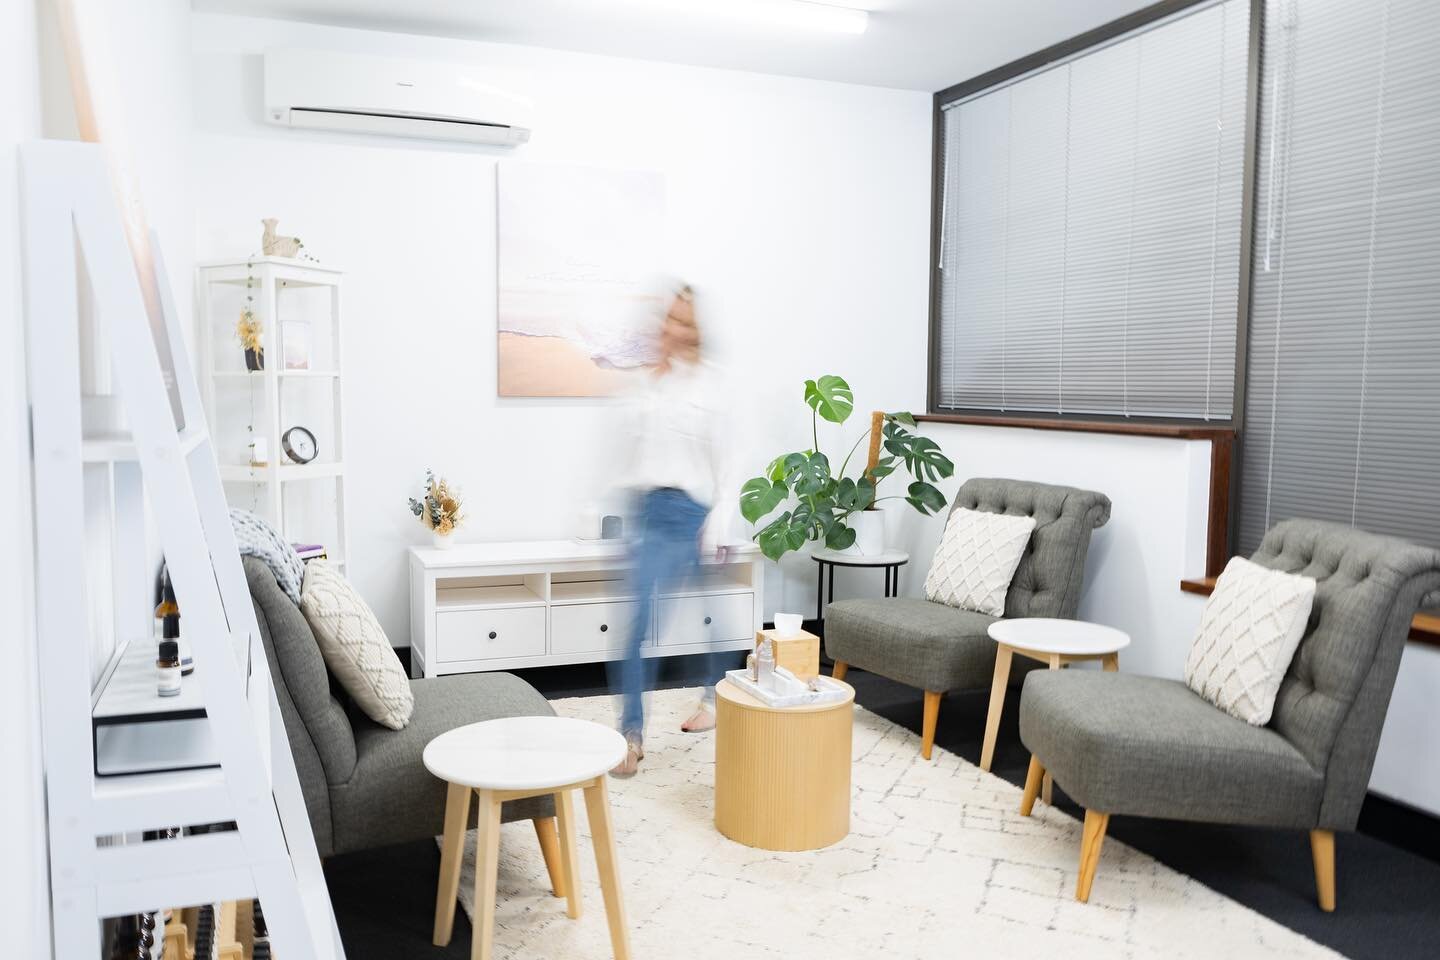 WELCOME TO MY TRANQUIL COUNSELLING SPACE ➖ 

Nestled in a leafy green, private courtyard behind the main building at 295 Rokeby Road, Subiaco you will find Wisdom Wellness. As you arrive you will be personally greeted by Justine Spencer, as she meets